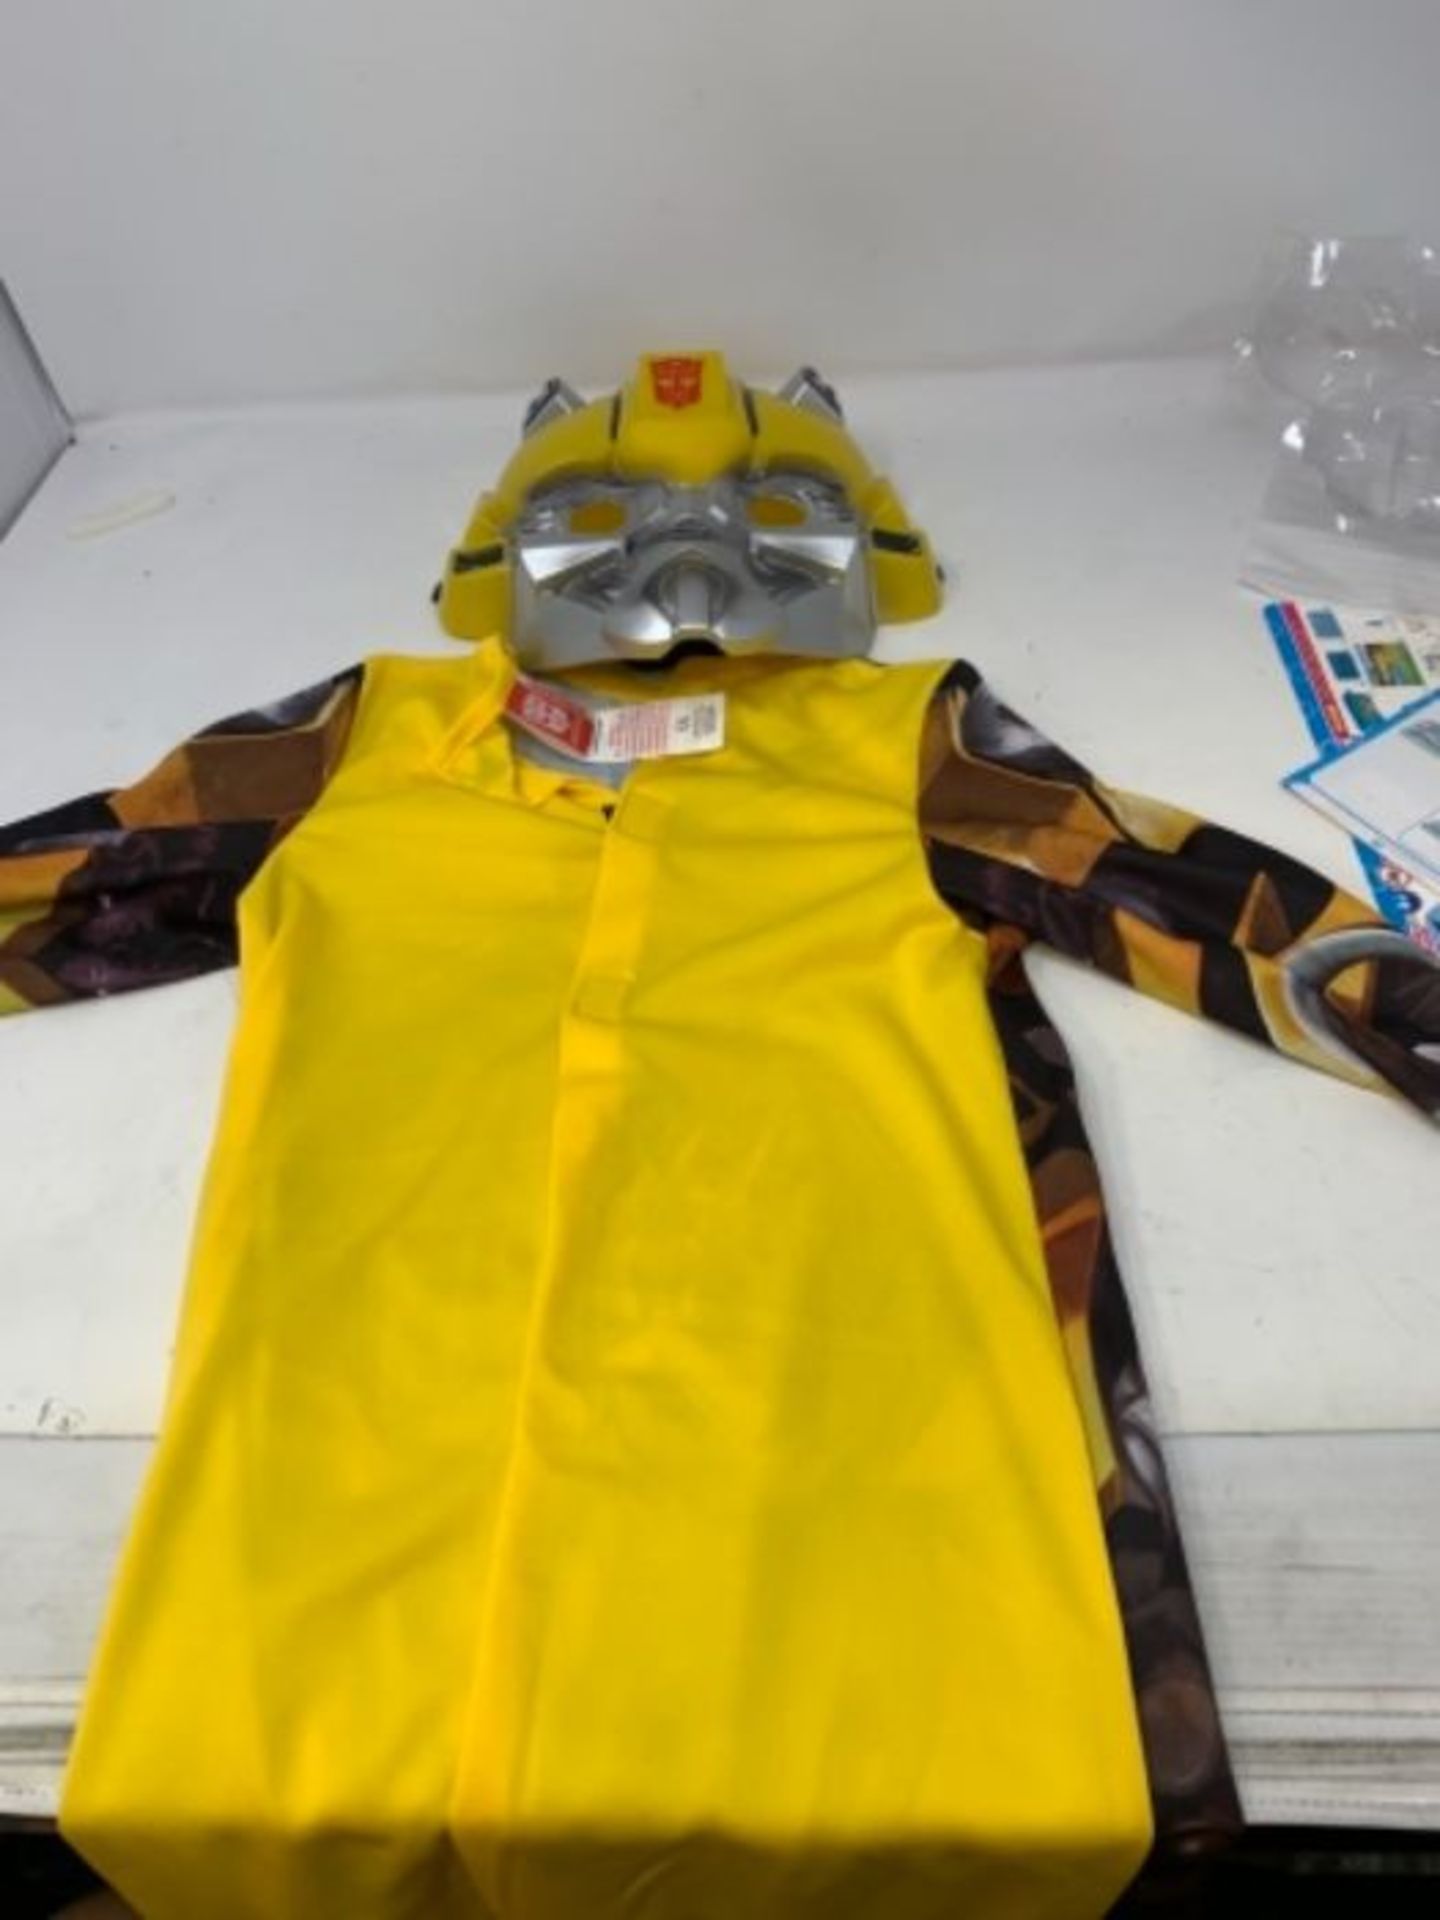 Rubie's Official Transformers The Last Knight Bumblebee Childs Costume, Small 3-4 Year - Image 2 of 2